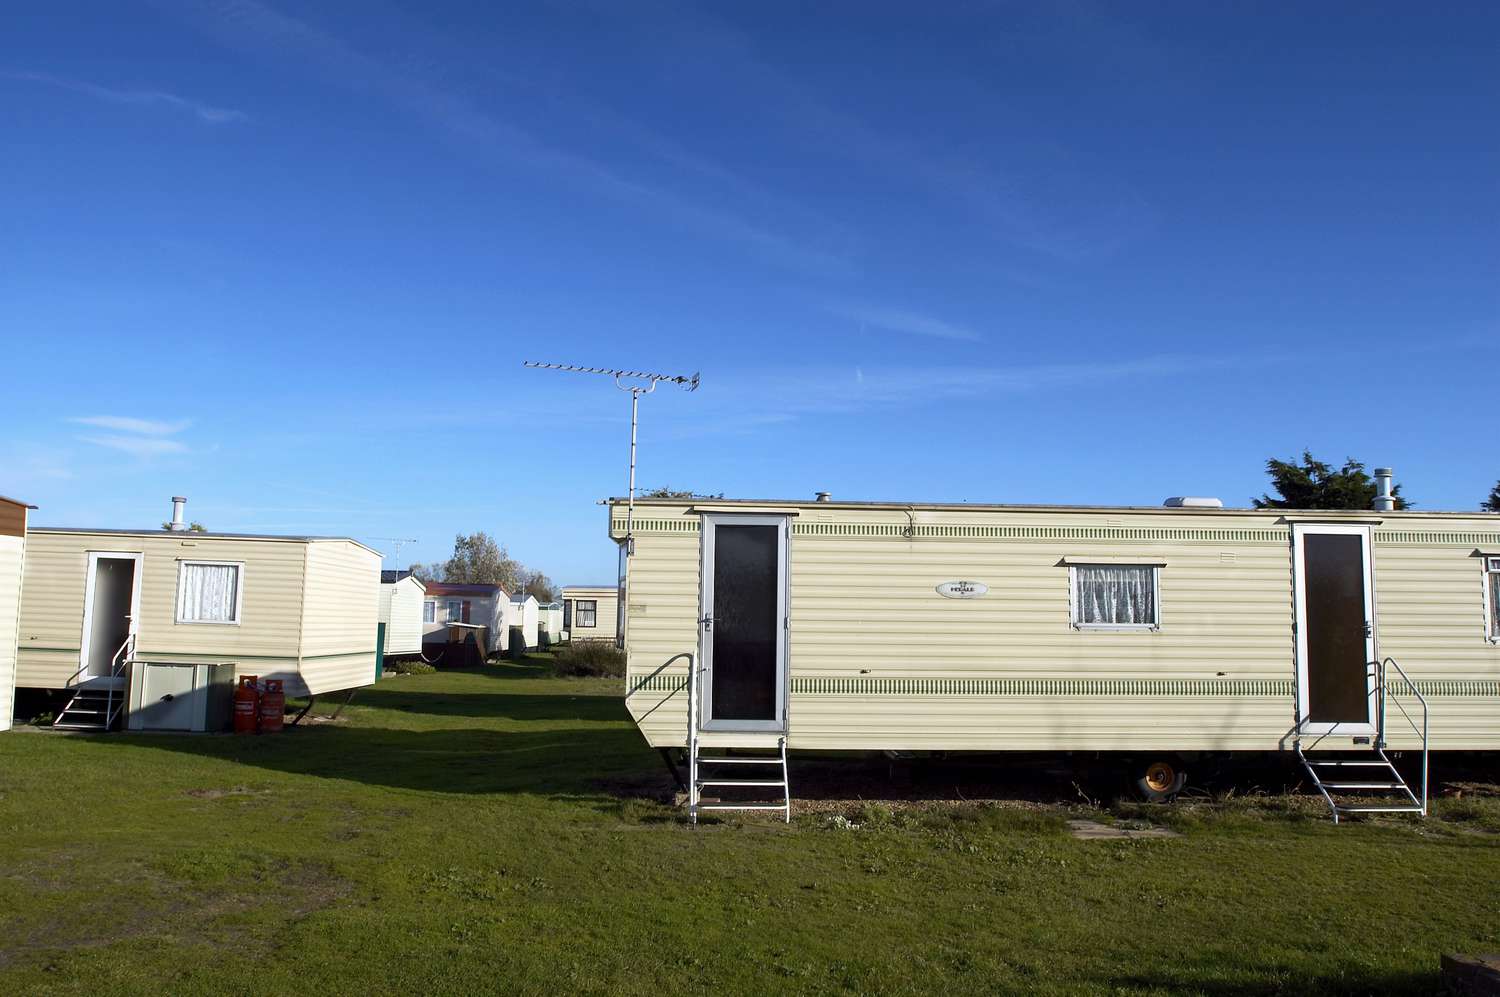 The Role of Valuation in Mobile Homes